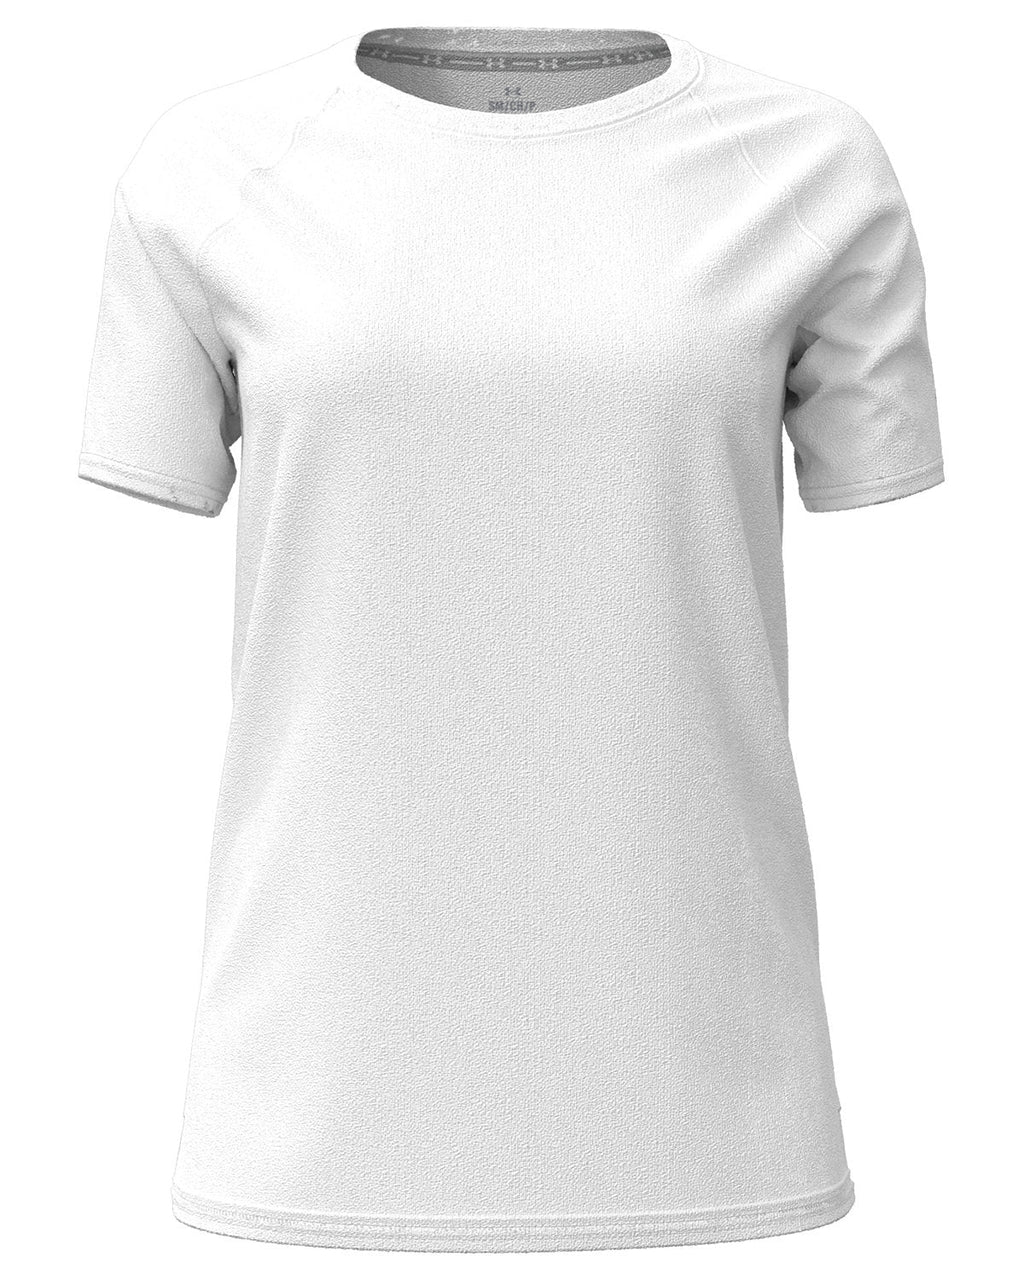 Under Armour Ladies Athletics T-Shirt with Custom Embroidery, 1376903